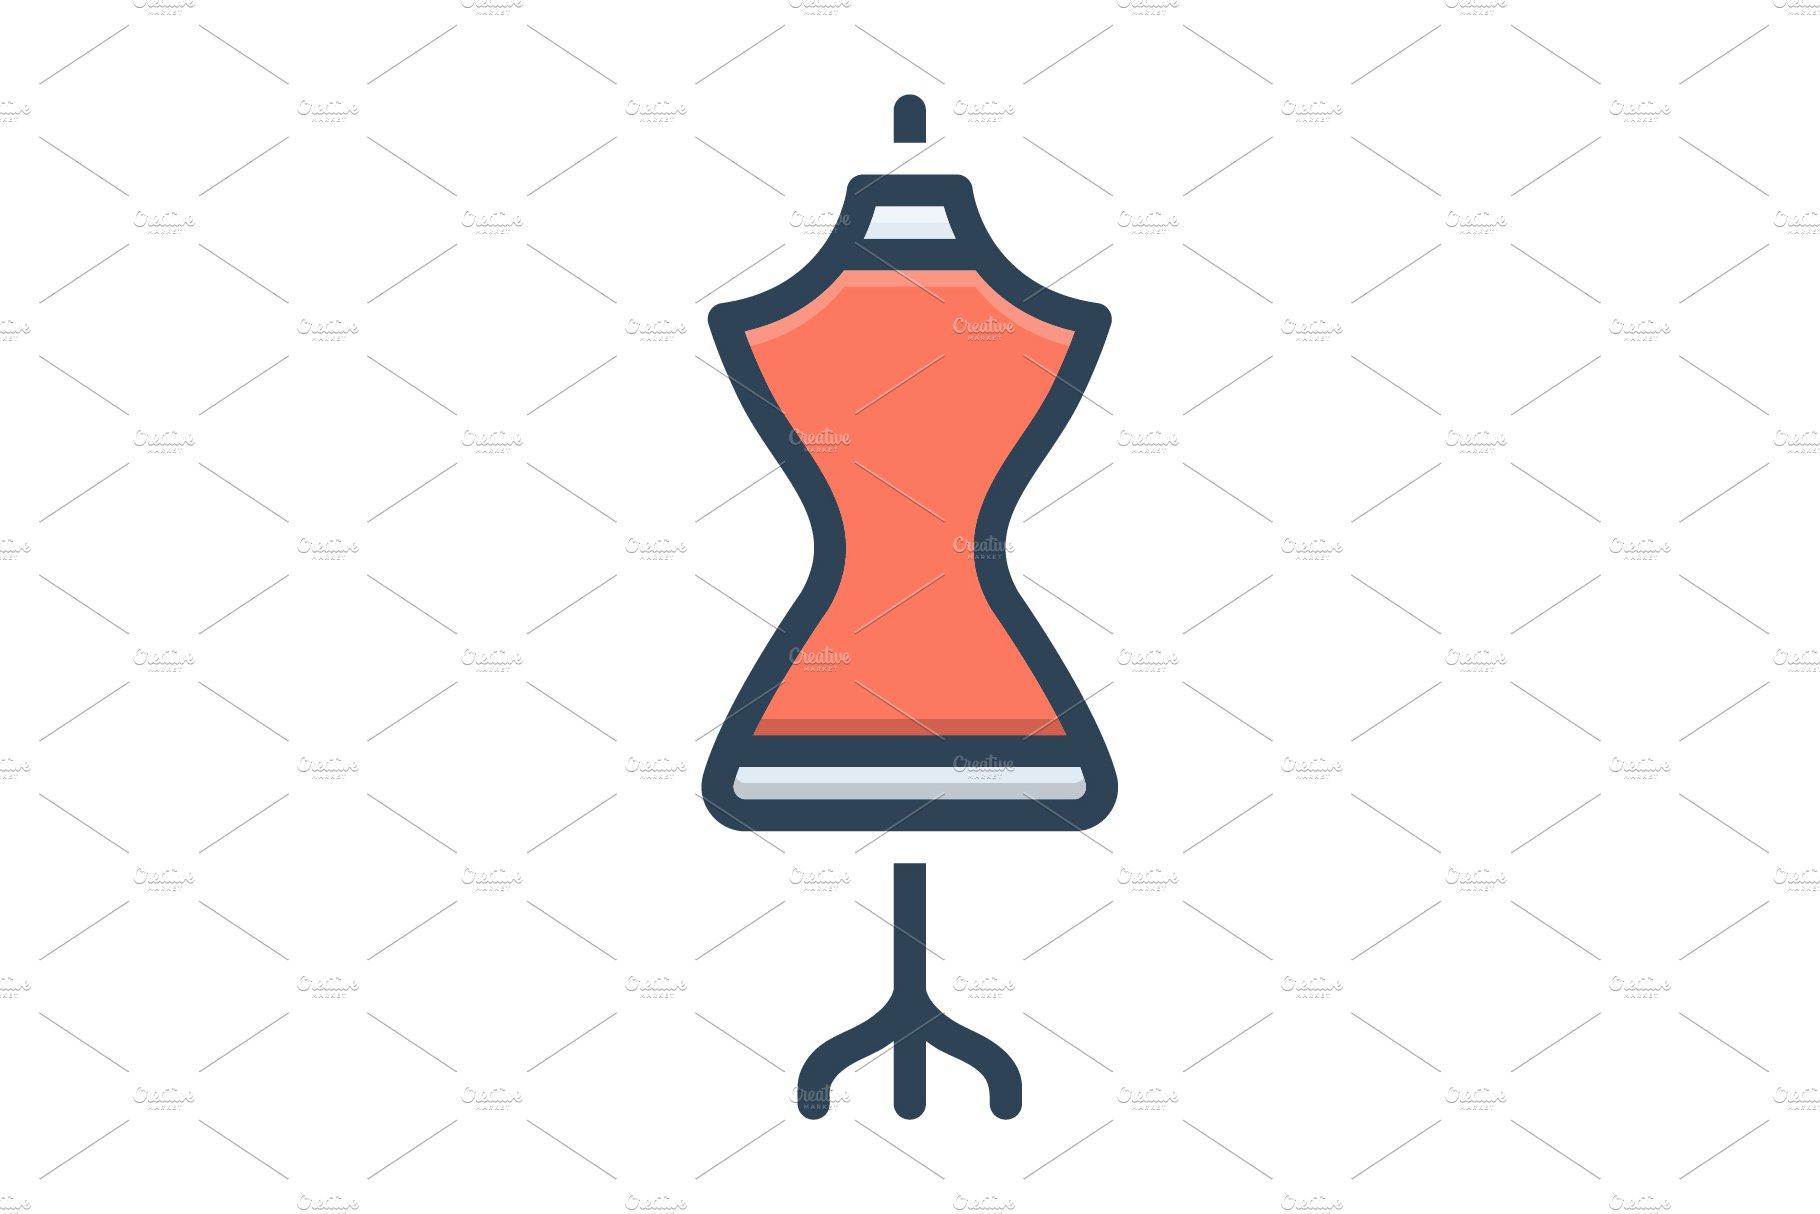 Dress form icon cover image.